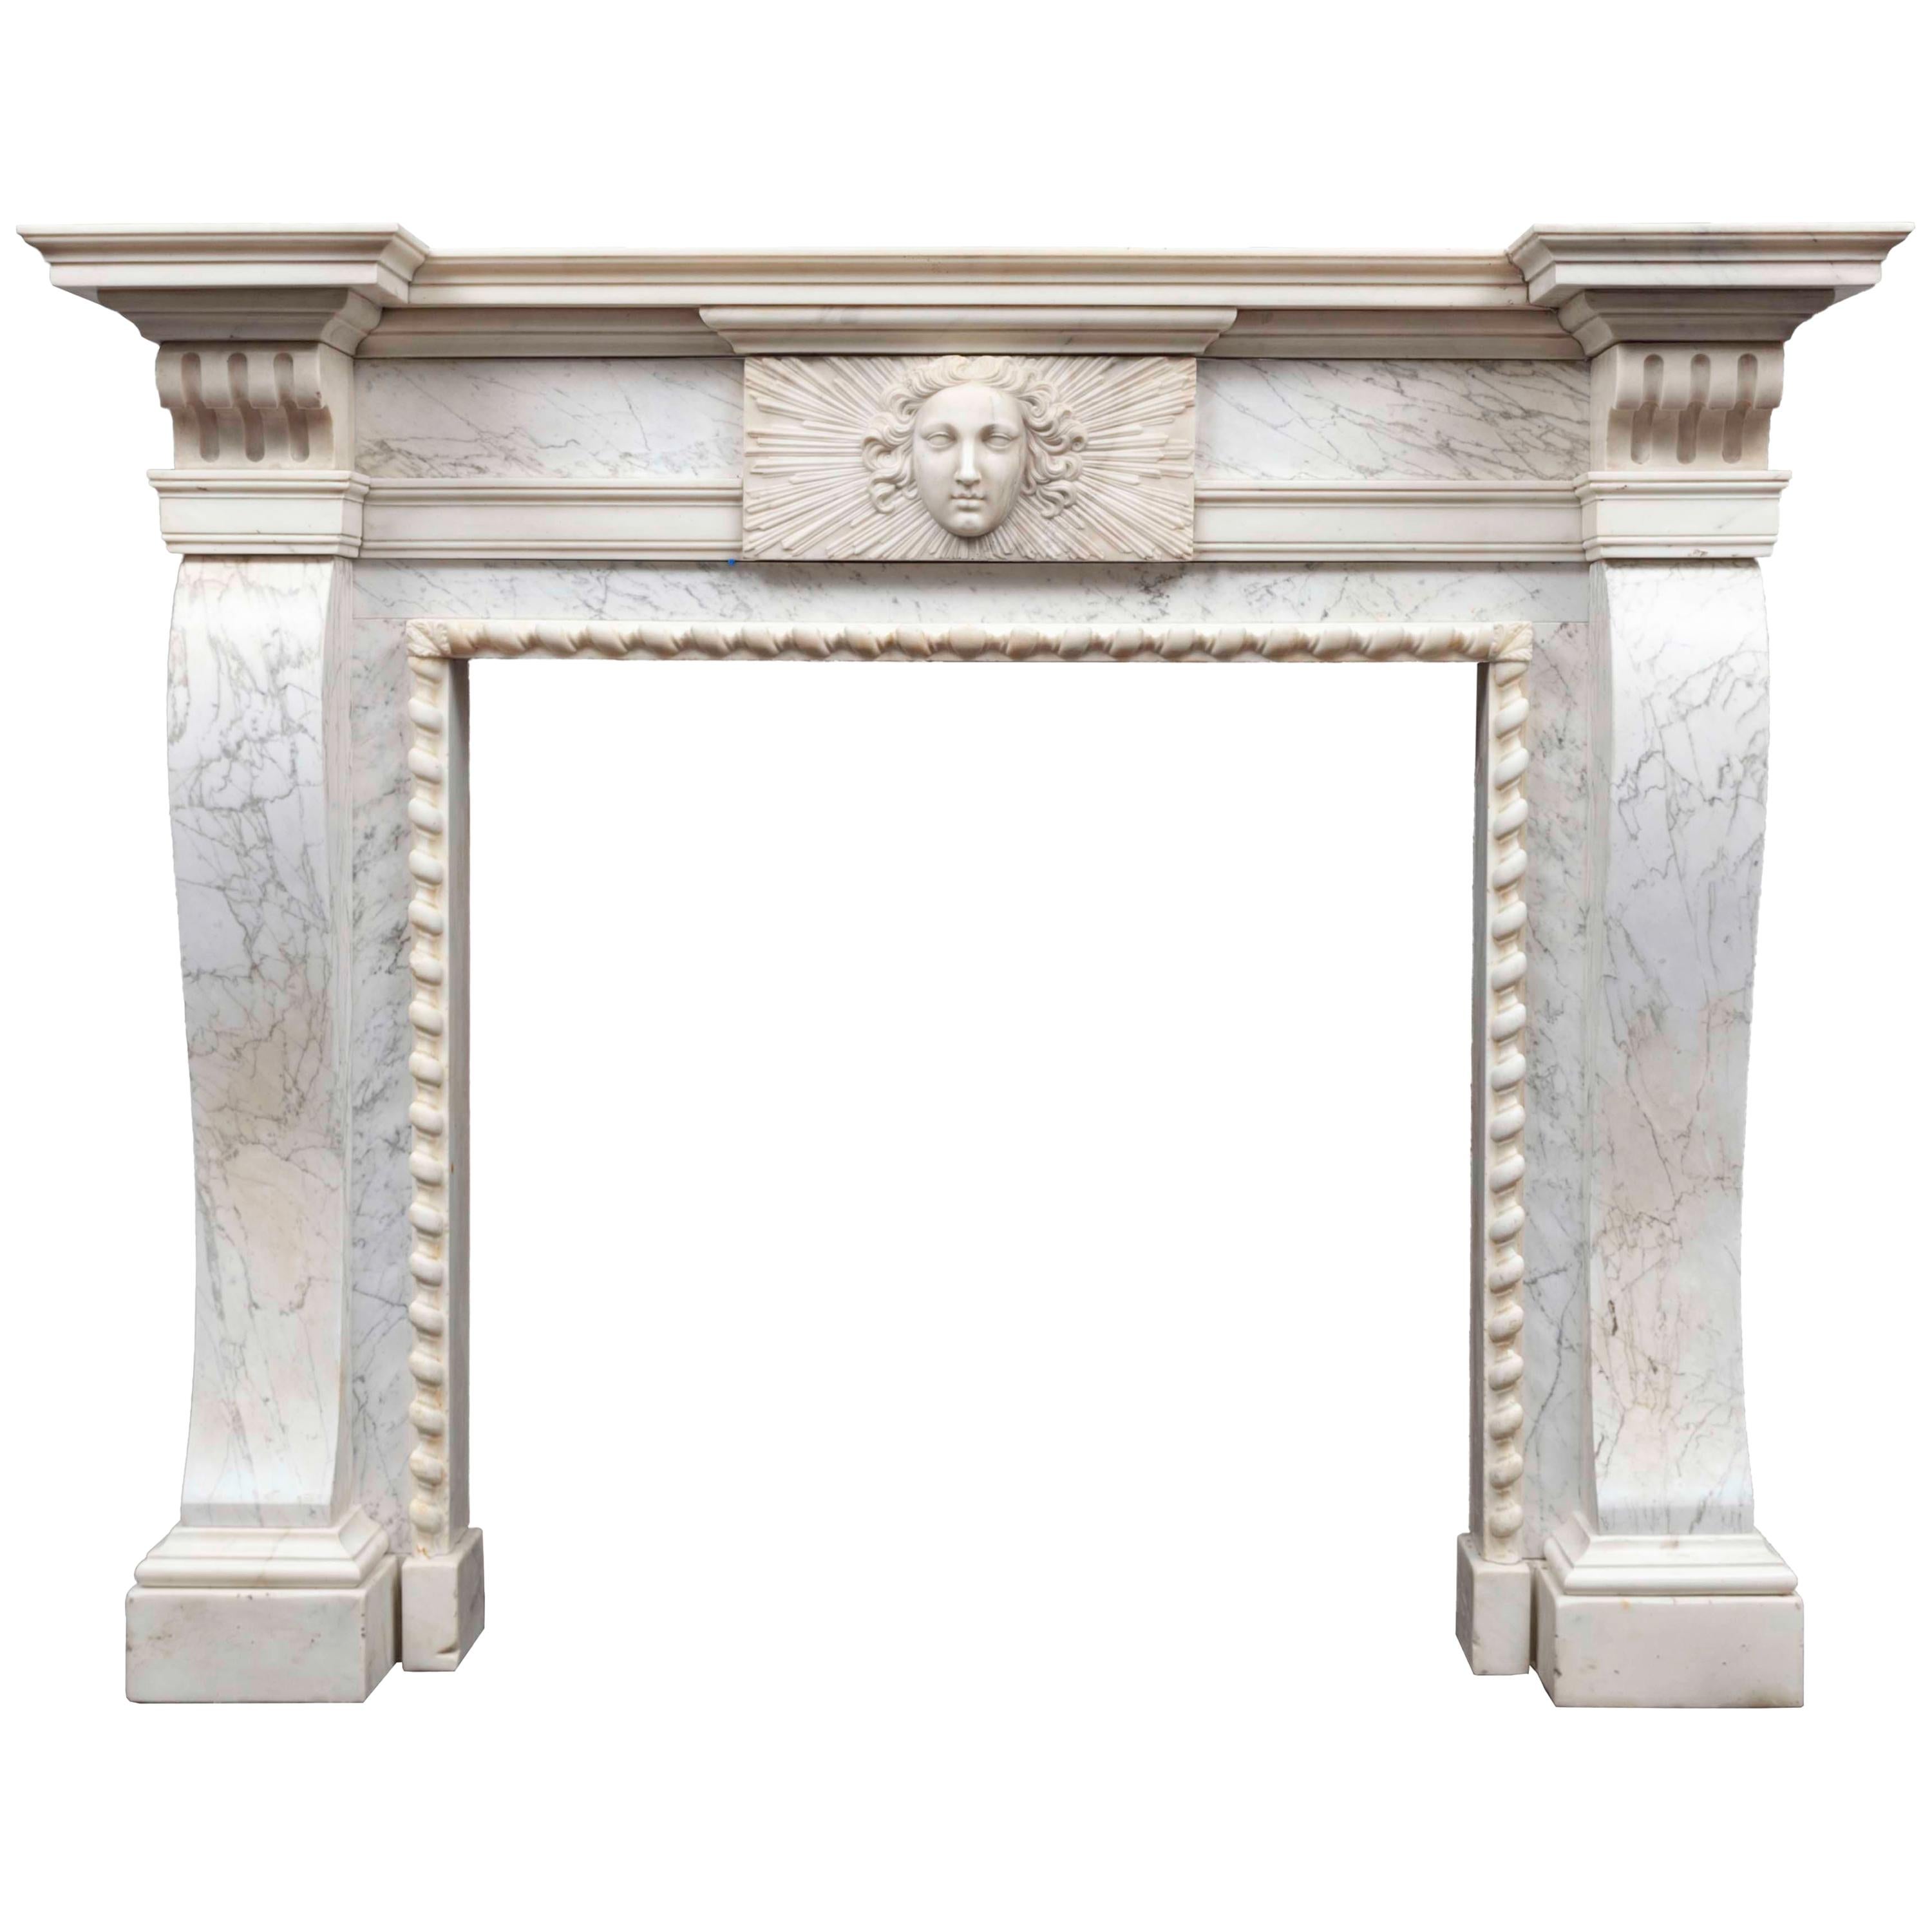 Antique George II Period Marble Mantelpiece in the Manner of William Kent